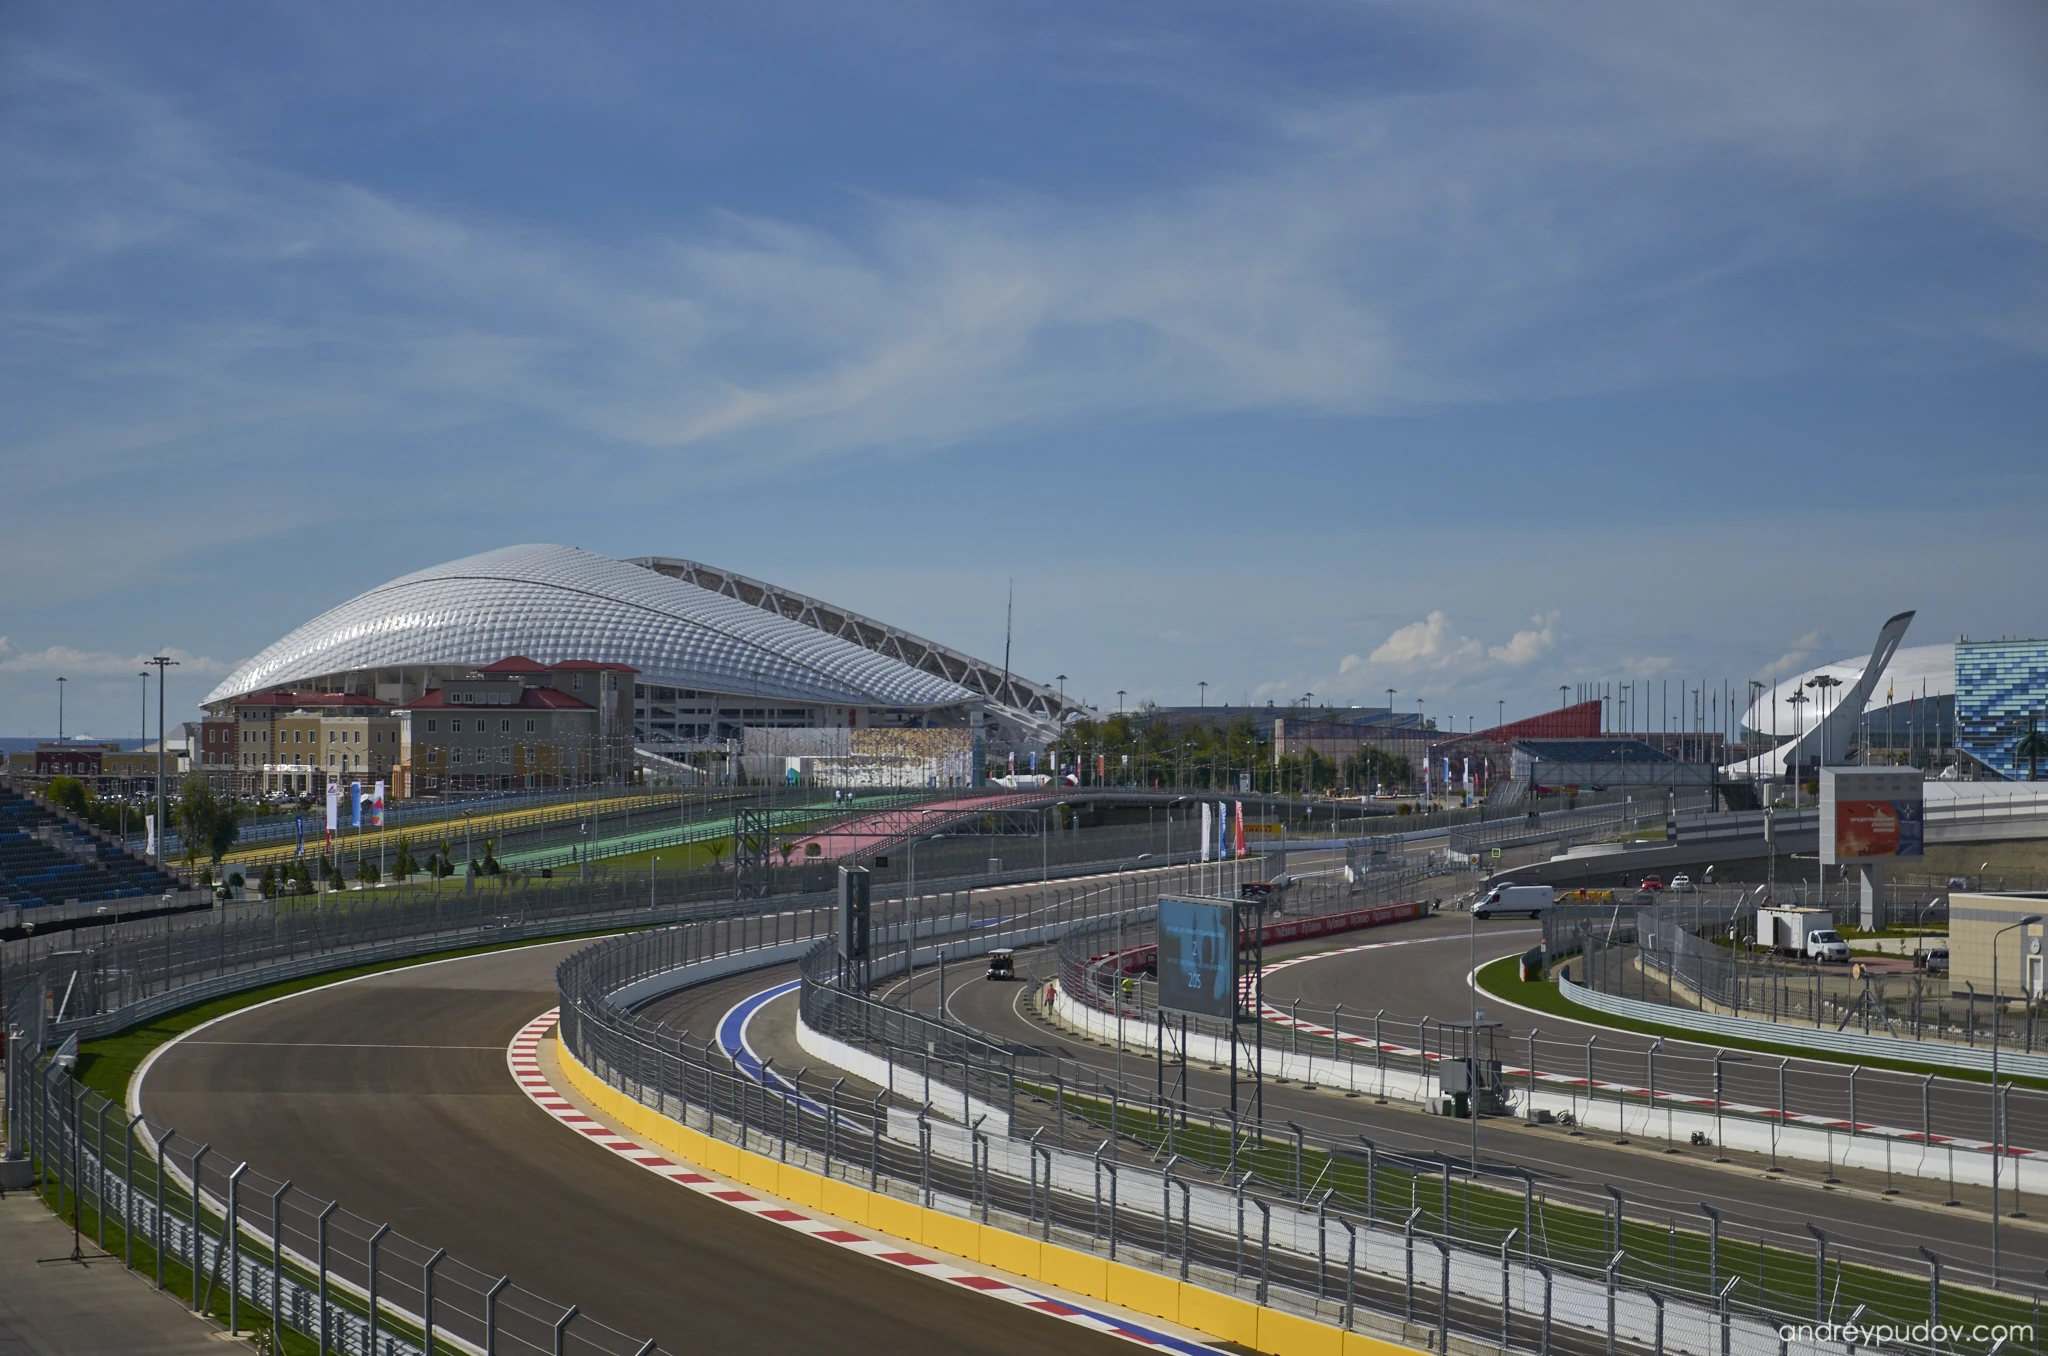 2015 Formula 1 Russian Grand Prix - View of the first corner of the Sochi Autodrom

The 5.848 km circuit is the fifth-longest circuit on the Formula One calendar, behind Spa-Francorchamps in Belgium, Jeddah Street Circuit in Saudi Arabia, Baku City Circuit in Azerbaijan and Silverstone in the UK.